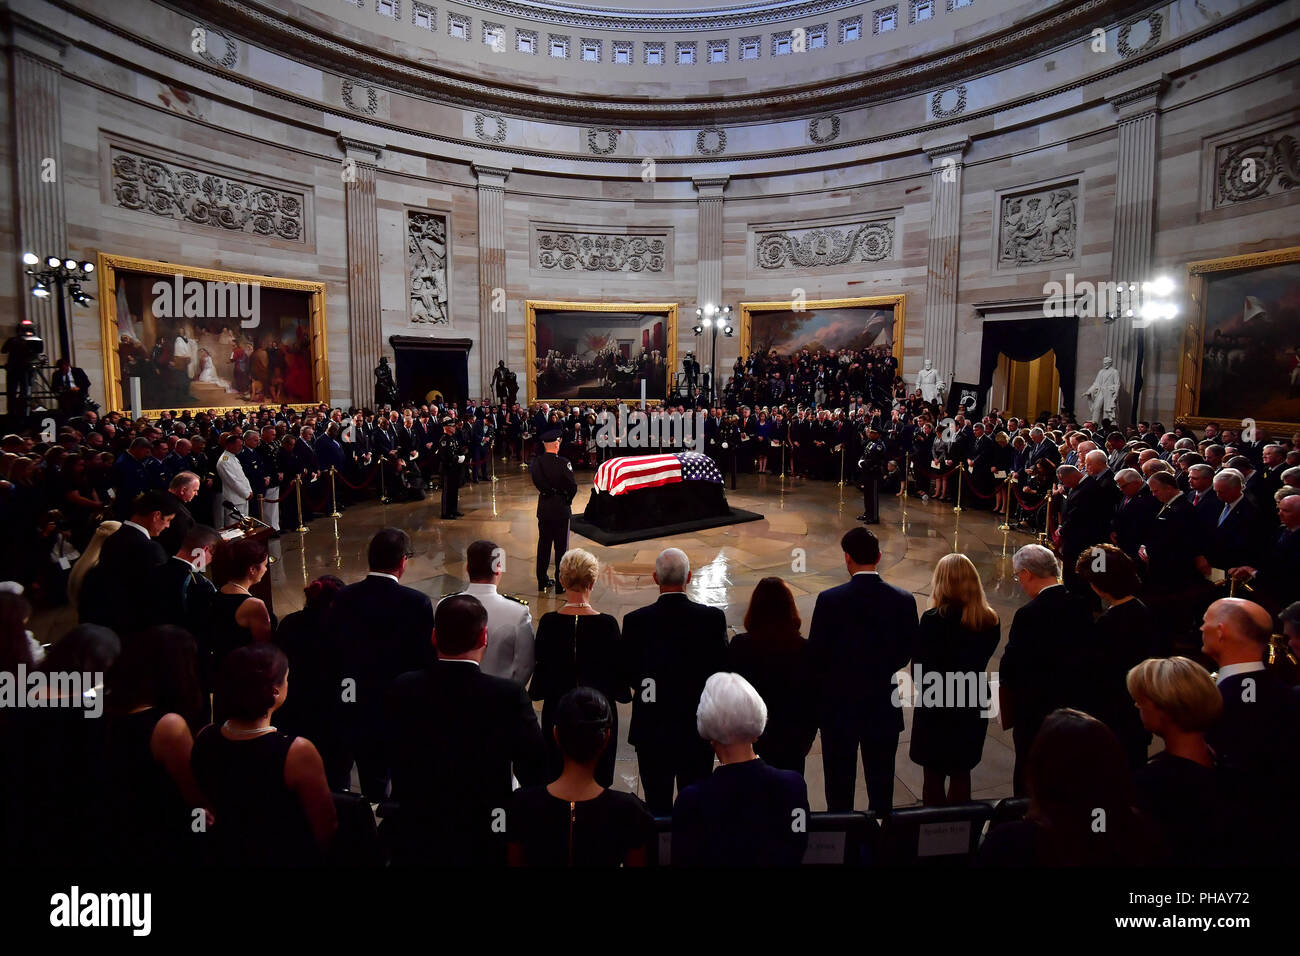 Mourners surround the casket of former Senator John McCain in the Capitol Rotunda where he will lie in state at the U.S. Capitol, in Washington, DC on Friday, August 31, 2018. McCain, an Arizona Republican, presidential candidate and war hero died August 25th at the age of 81. He is the 31st person to lie in state at the Capitol in 166 years. Photo by Kevin Dietsch/UPI | usage worldwide Stock Photo